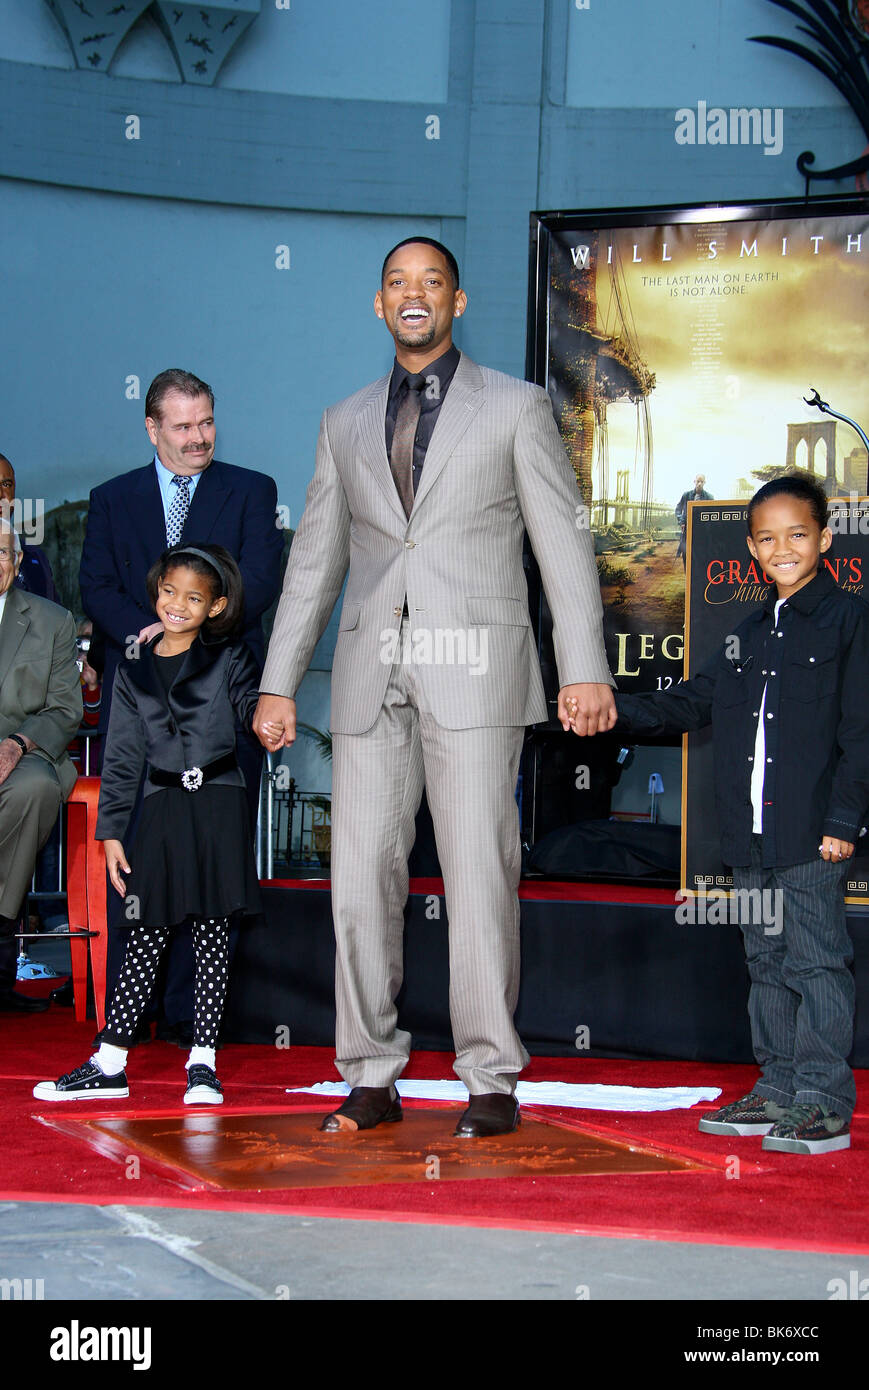 WILLOW SMITH WILL SMITH & JADEN SMITH WILL SMITH HAND AND FOOTPRINT CEREMONY GRAUMANS CHINESE HOLLYWOOD LOS ANGELES USA 10 Stock Photo